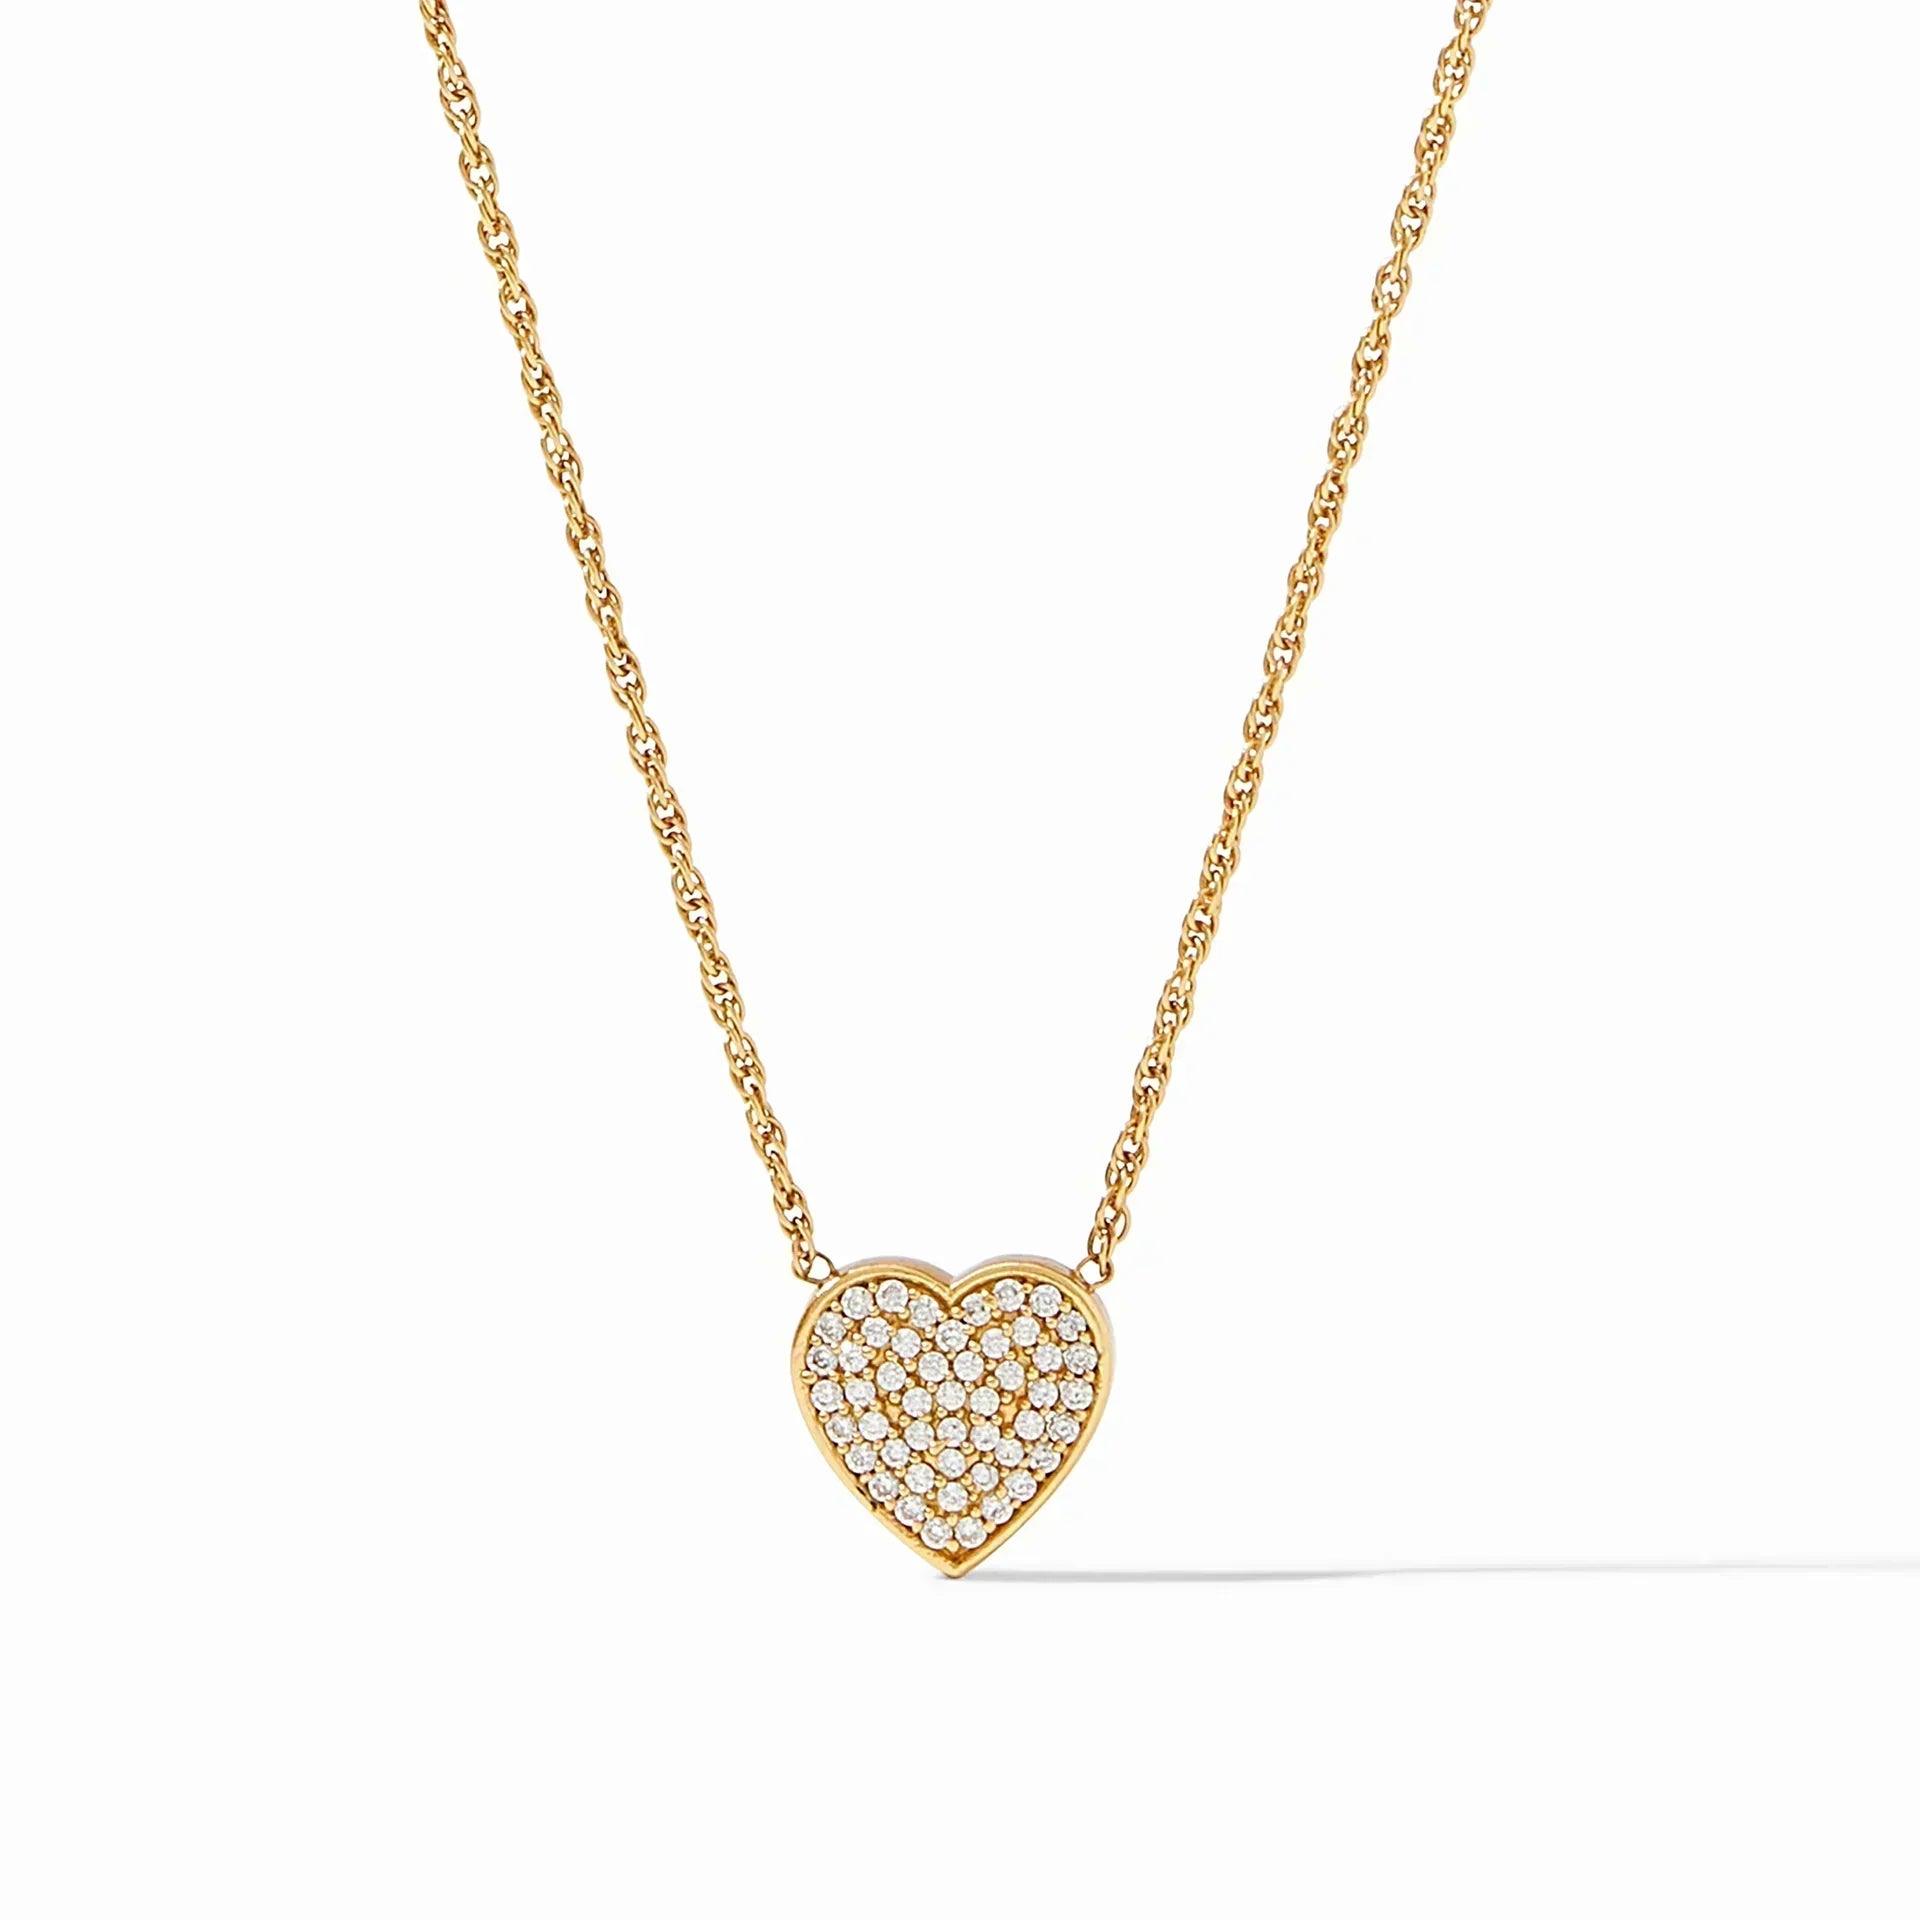 Heart Pave Delicate Necklace